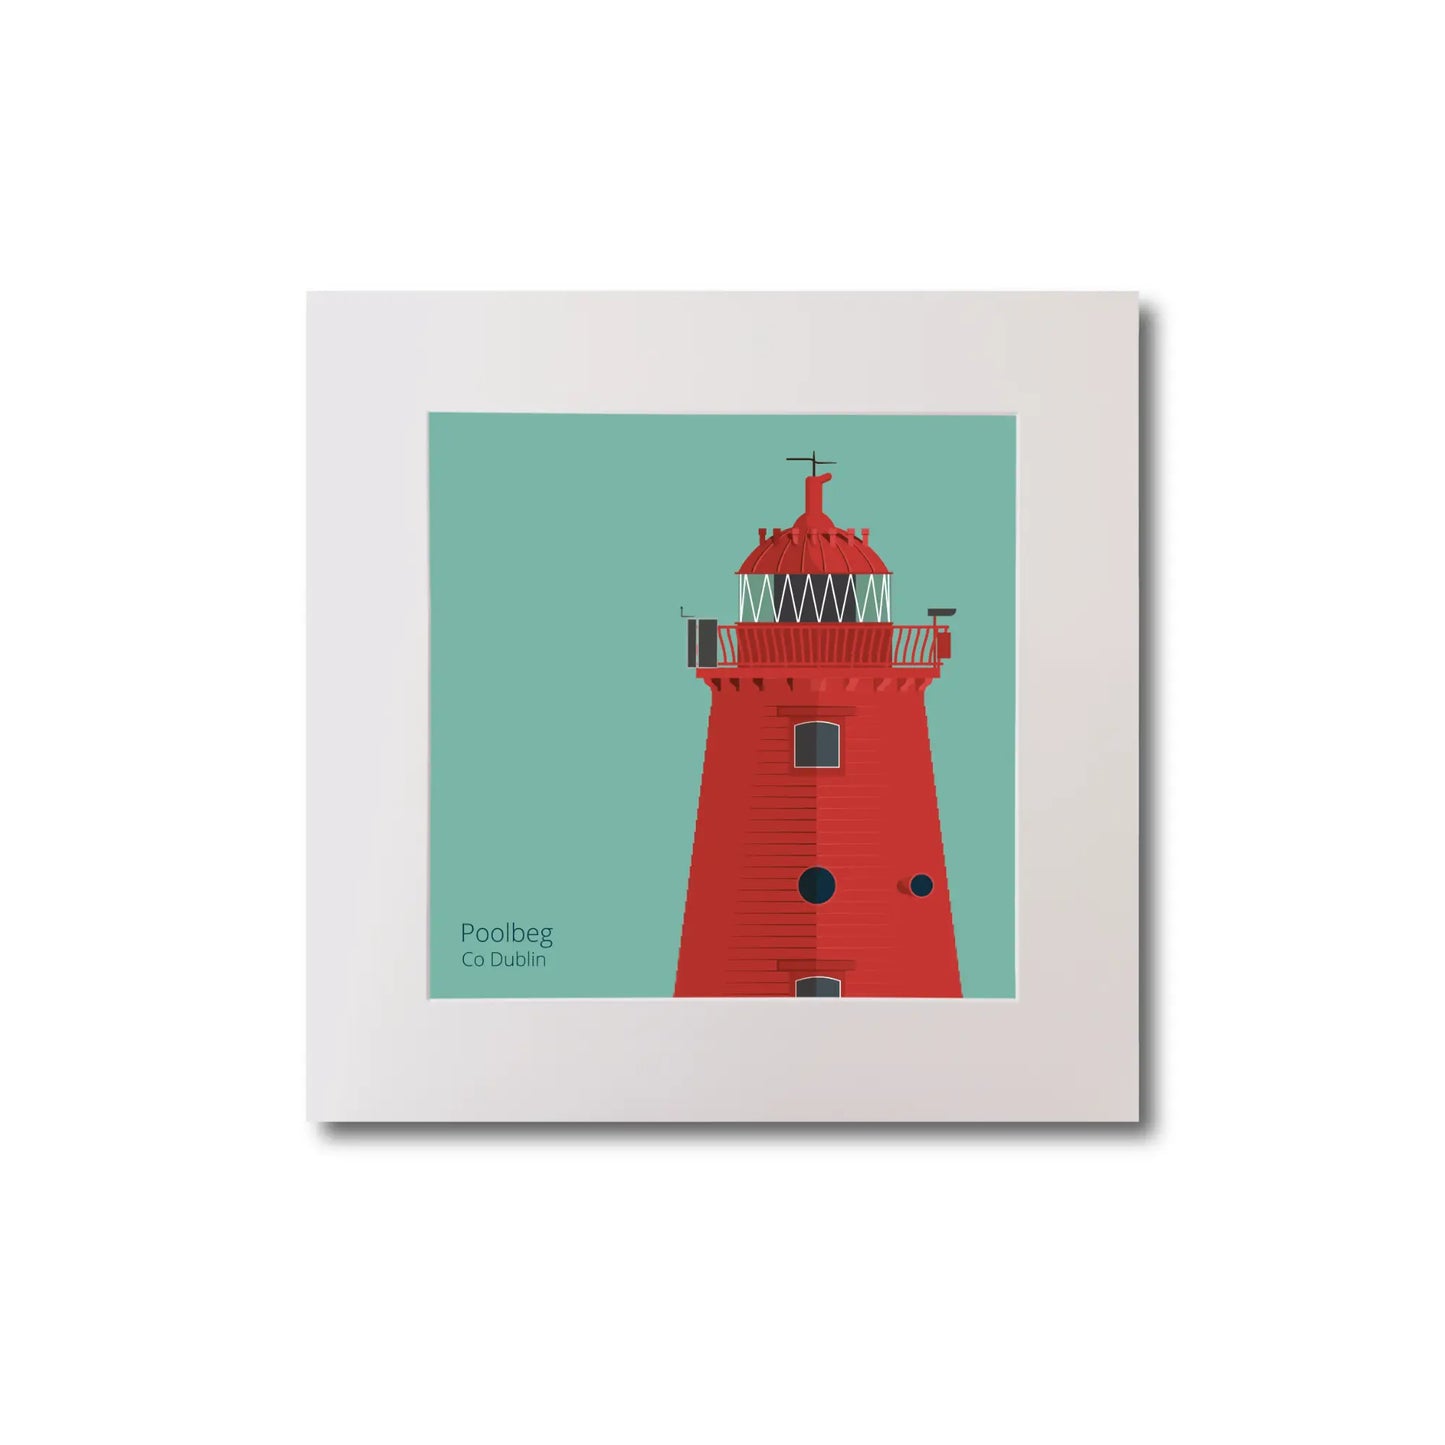 Illustration of Poolbeg lighthouse on an ocean green background, mounted and measuring 20x20cm.